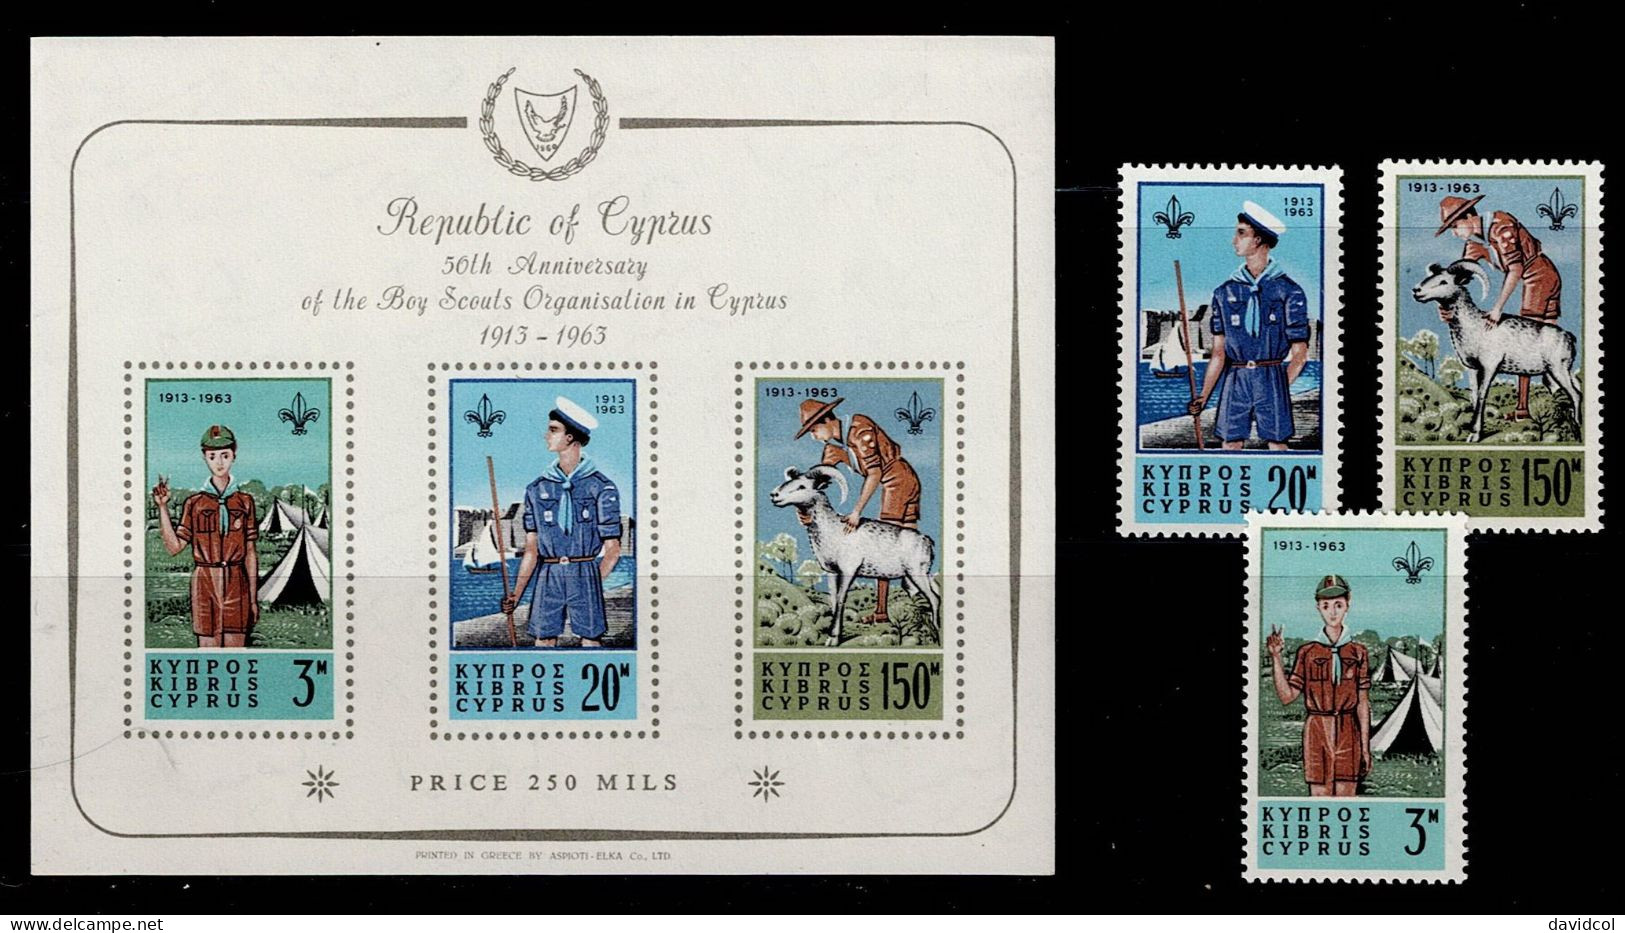 CHP-02- CYPRUS - 1963 - MNH -SCOUTS- 50TH ANNIVERSARY BOY SCOUTS OF CYPRUS - Ungebraucht